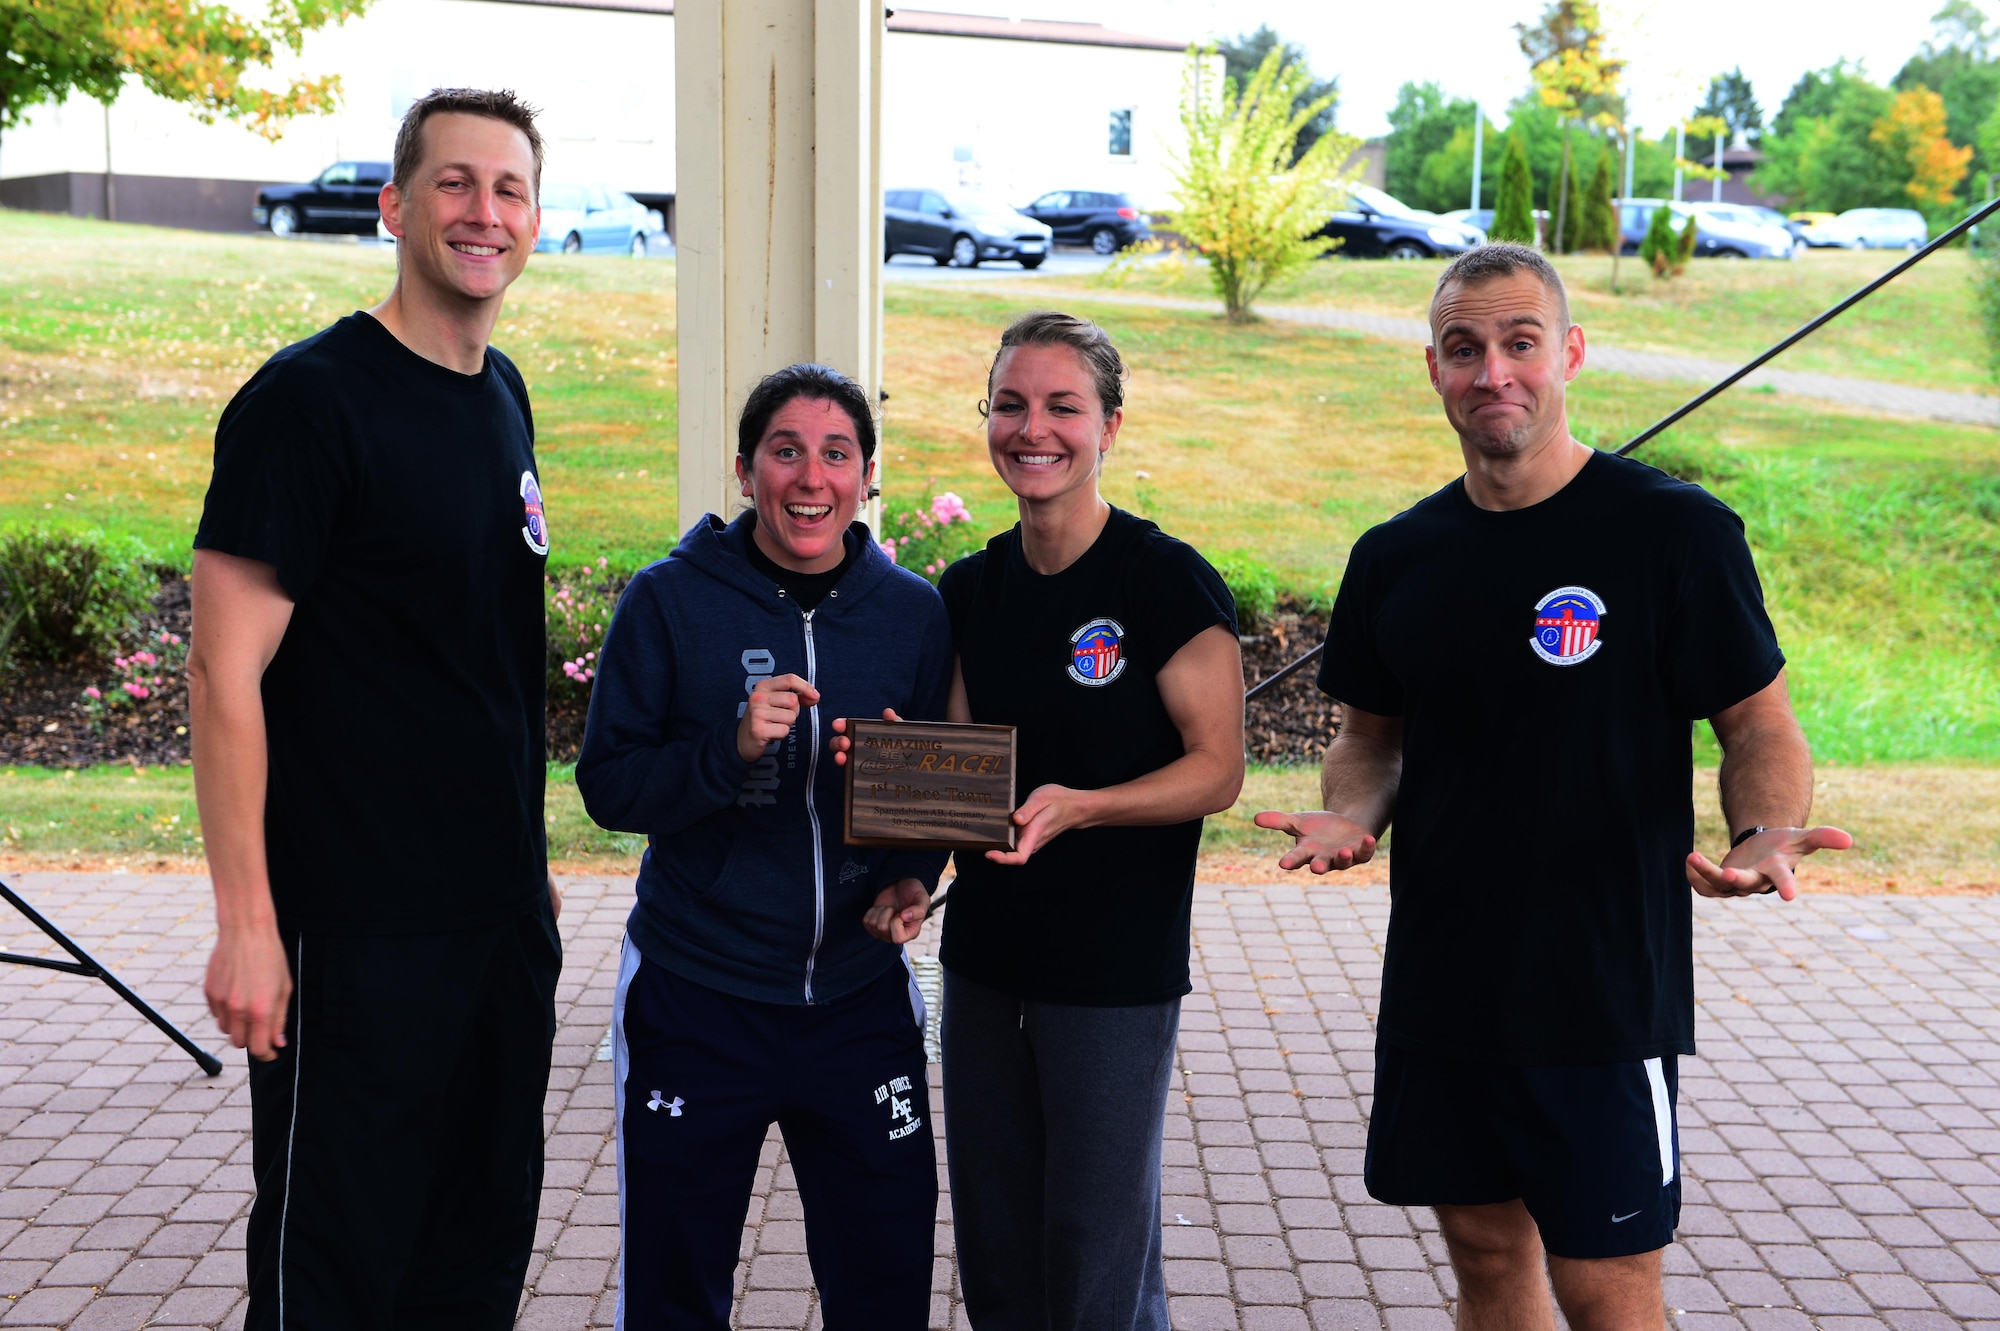 52nd Fighter Wing Airmen receive a plaque for winning The Amazing Be Ready Race recognizing National Preparedness Month at Spangdahlem Air Base, Germany, Sept. 30, 2016. The race consisted of several stations challenging Airmen on their knowledge and readiness for emergency response and preparedness. (U.S. Air Force photo by Senior Airman Joshua R. M. Dewberry)